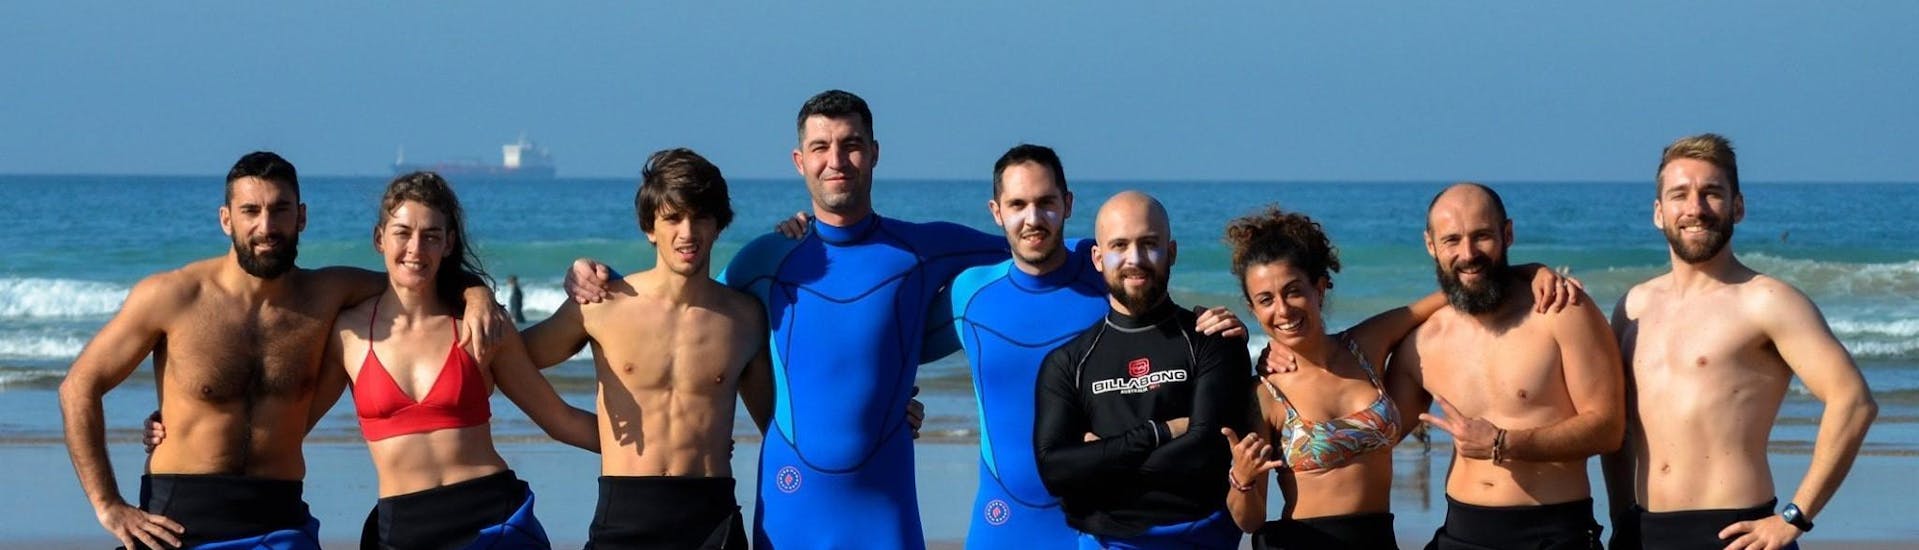 A group of surfers stands on the beach together with their surf instructors from Latas Surf and smile into the camera.